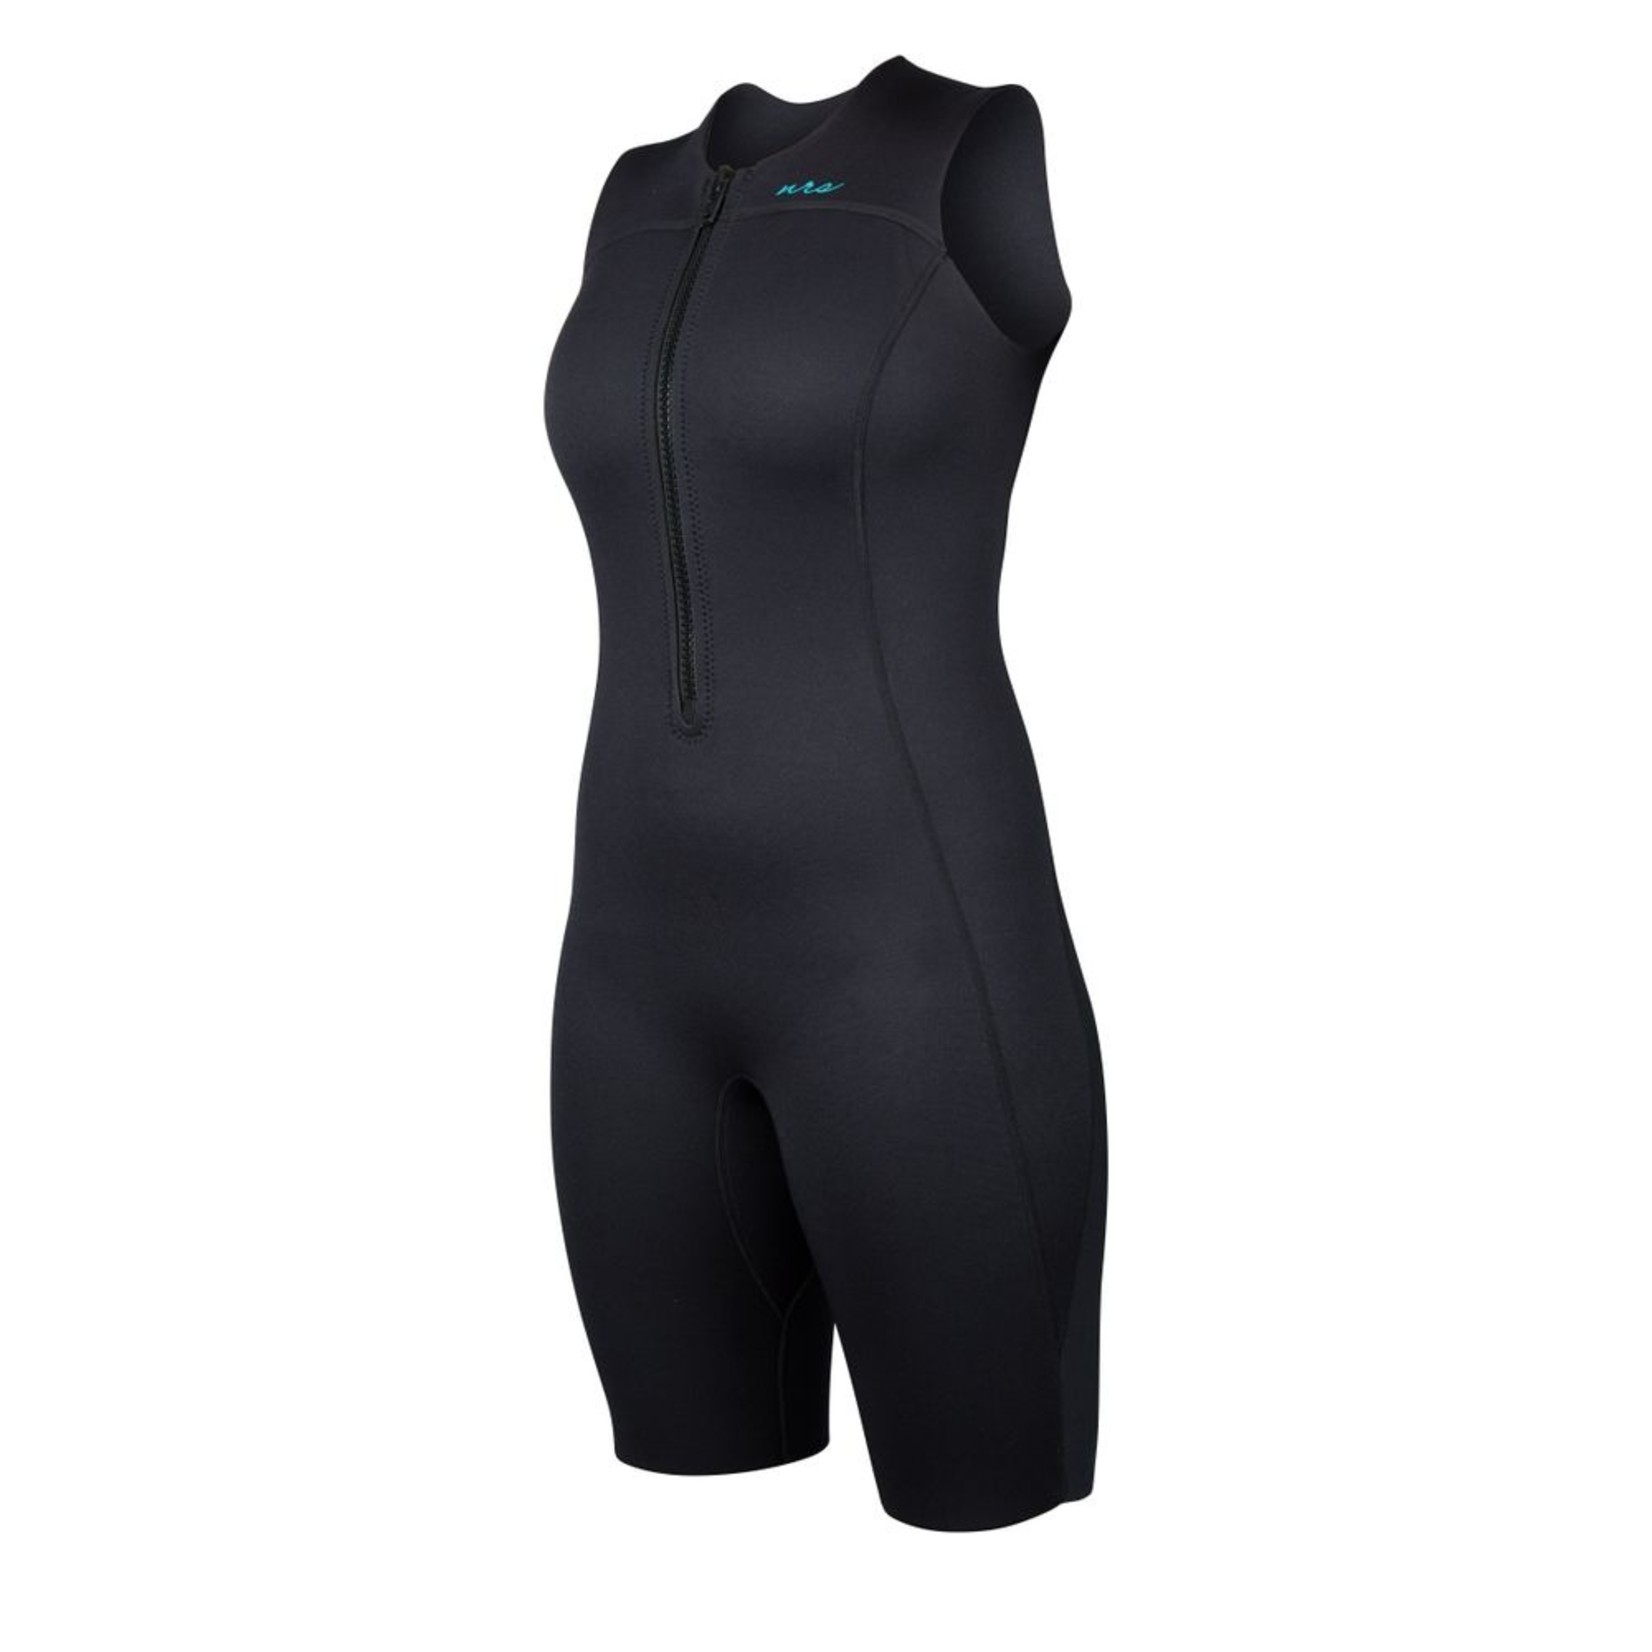 NRS NRS Women's 2.0 Shorty Wetsuit